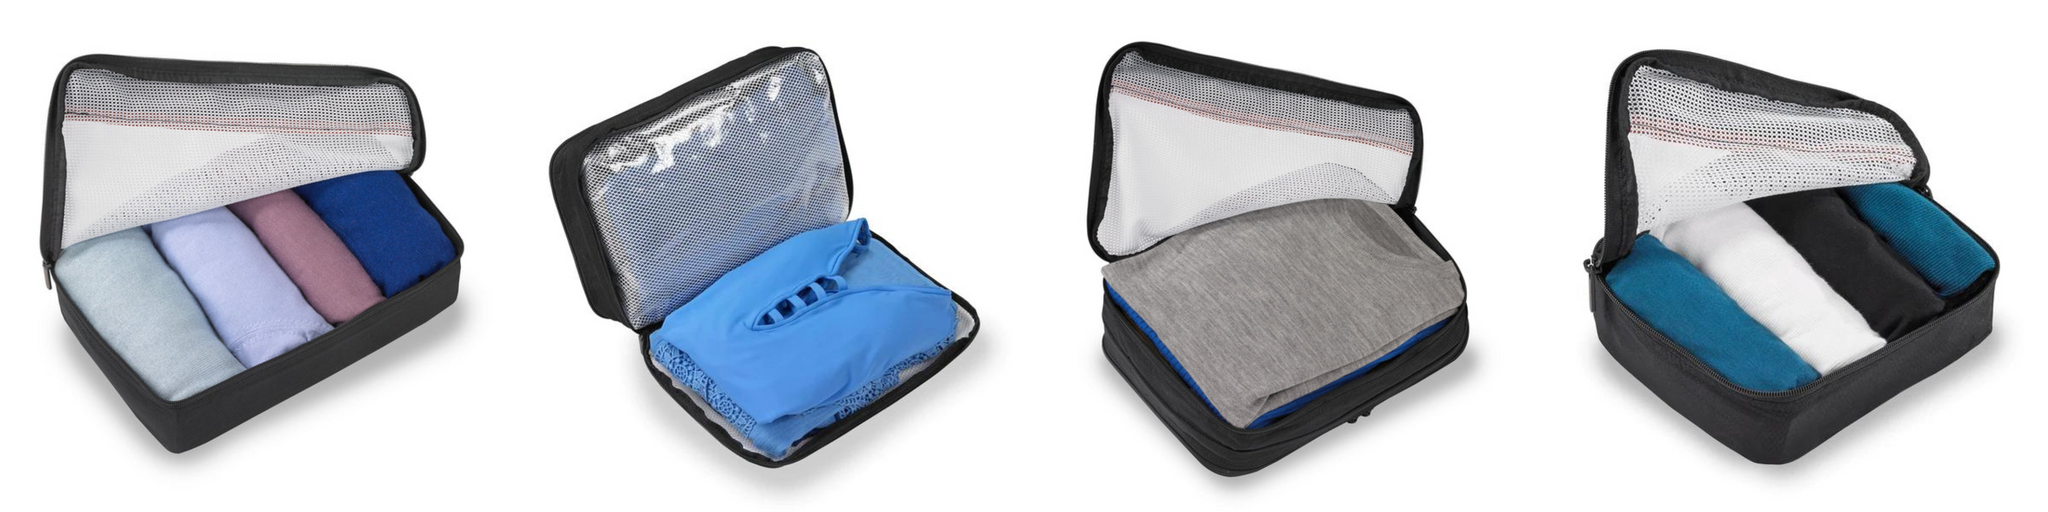 multiple ways to use packing cubes